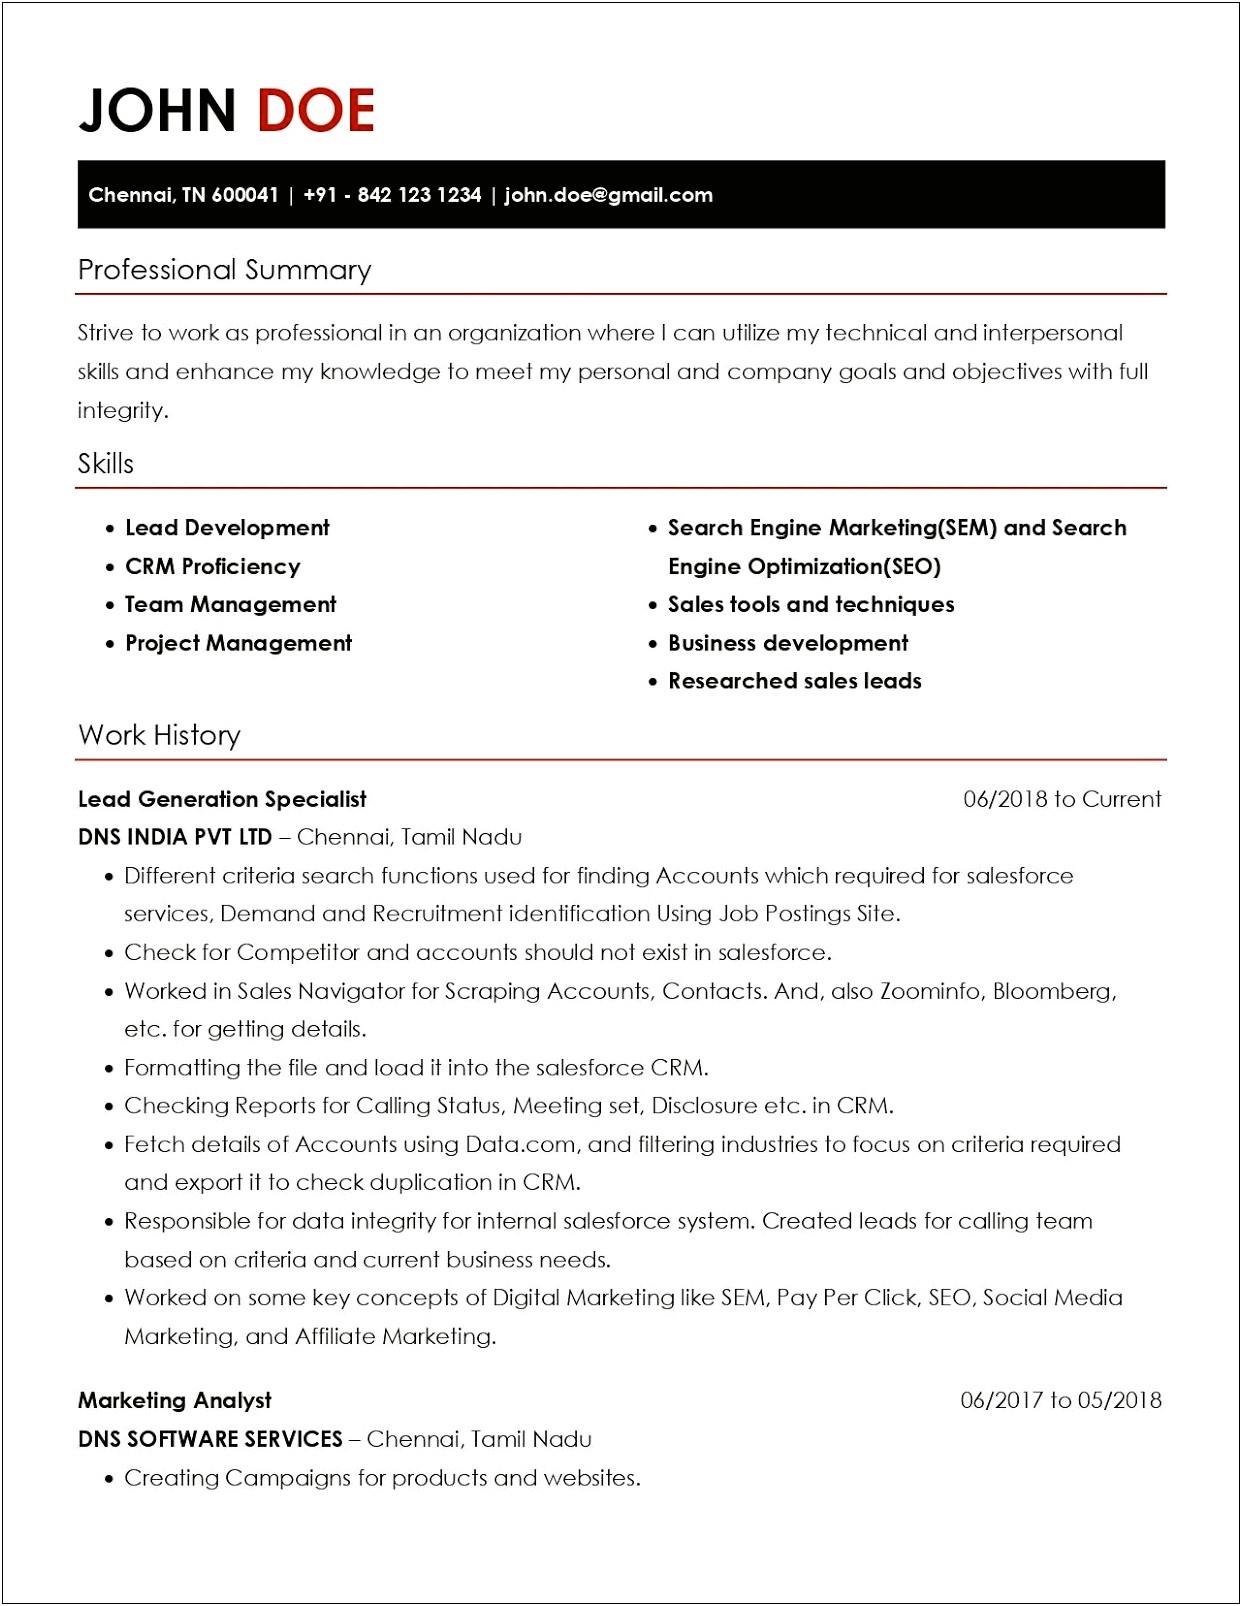 Ca Fresher Resume In Word Format